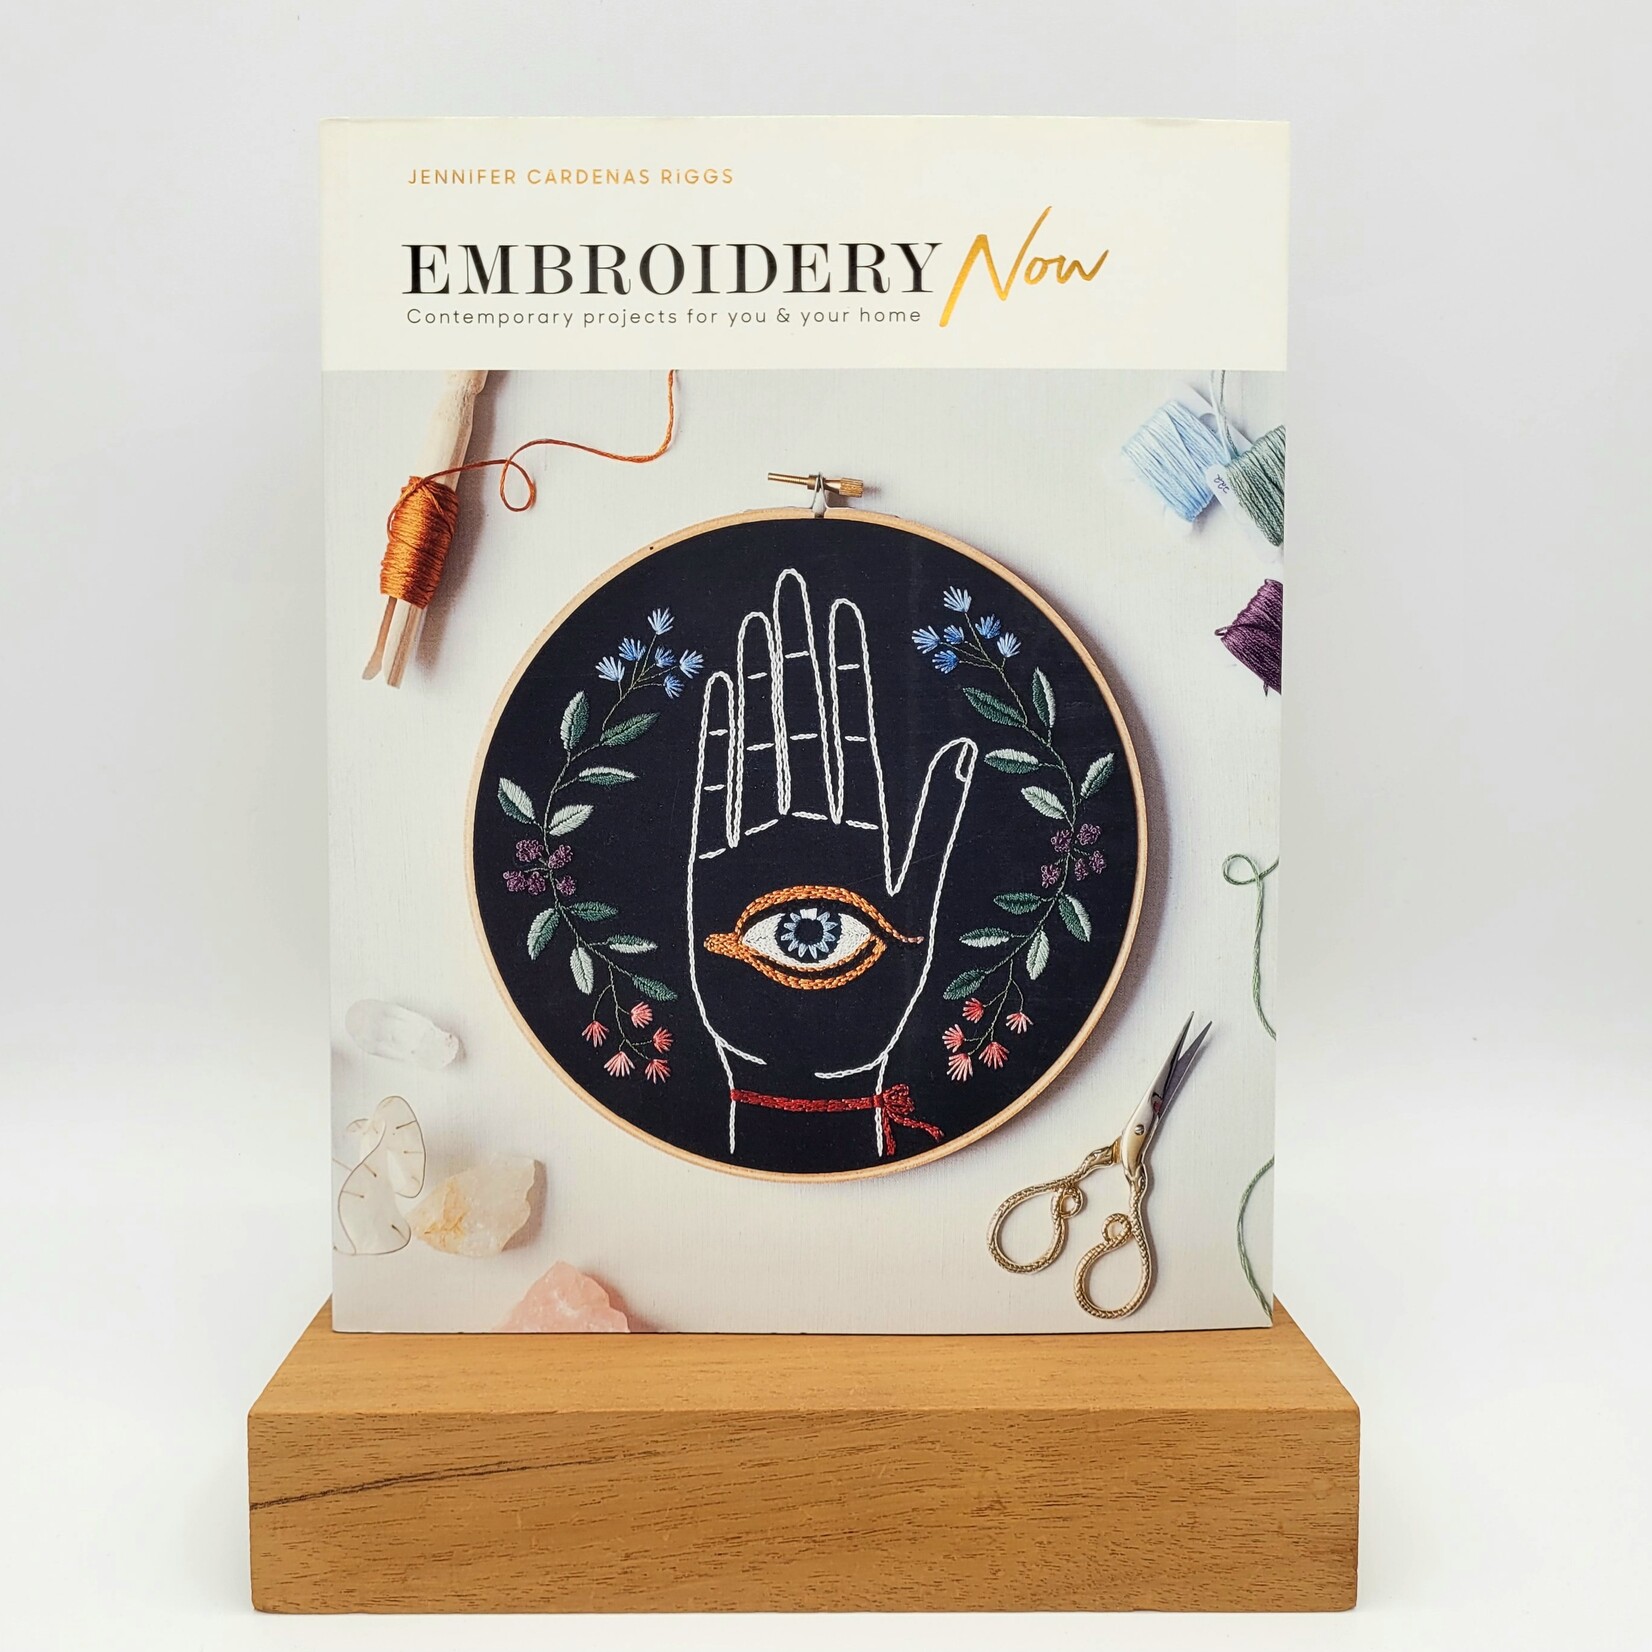 Hardie Grant Books Embroidery NOW by Jennifer Cardenas Riggs